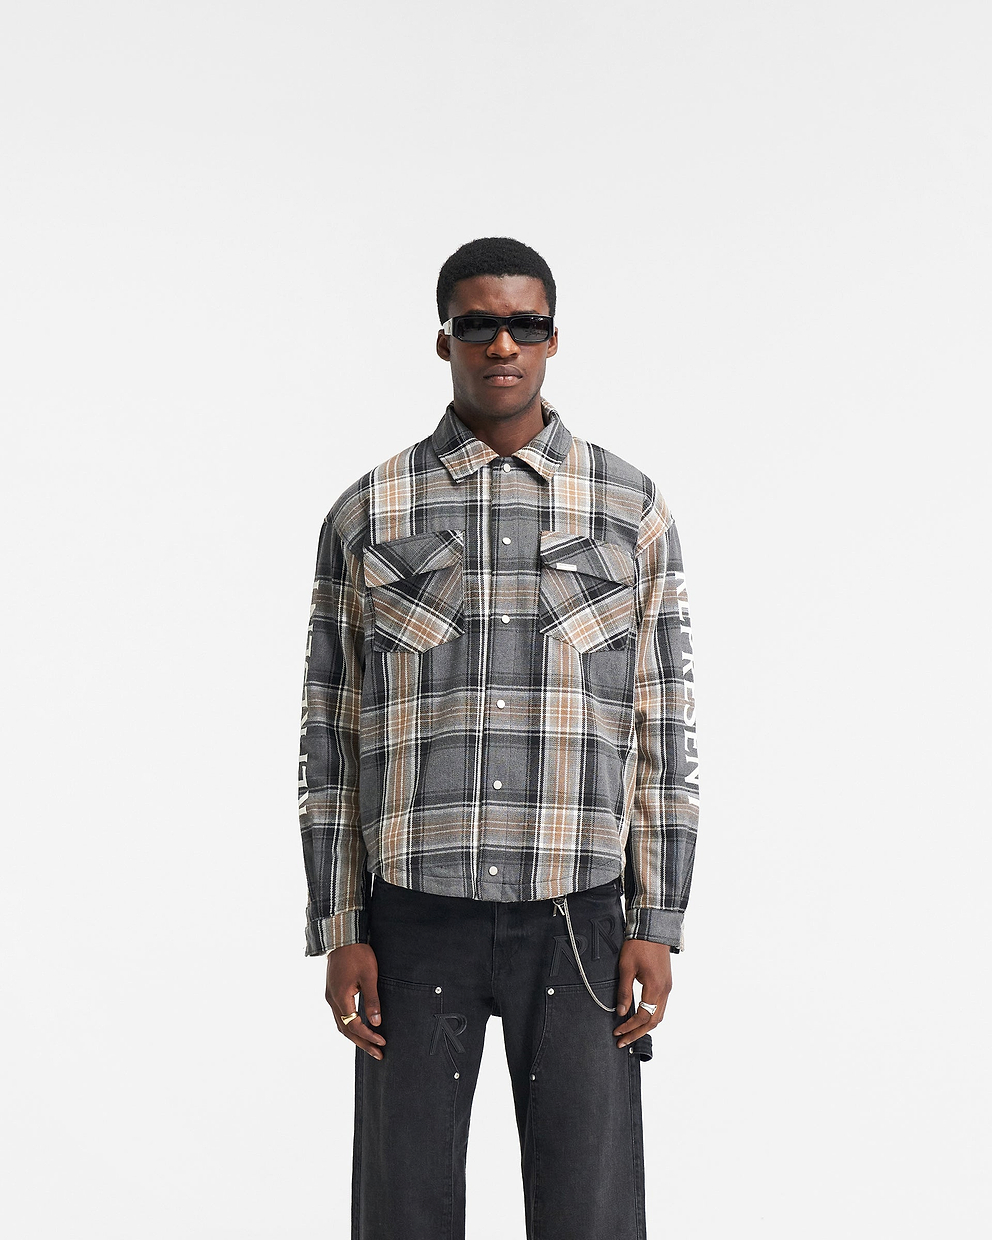 Plaid Flannel Shirt Red Button Down Flannel Shirt Jacket With Curved Hem  Plaid Shirt Jacket With Front Pocket -  Norway